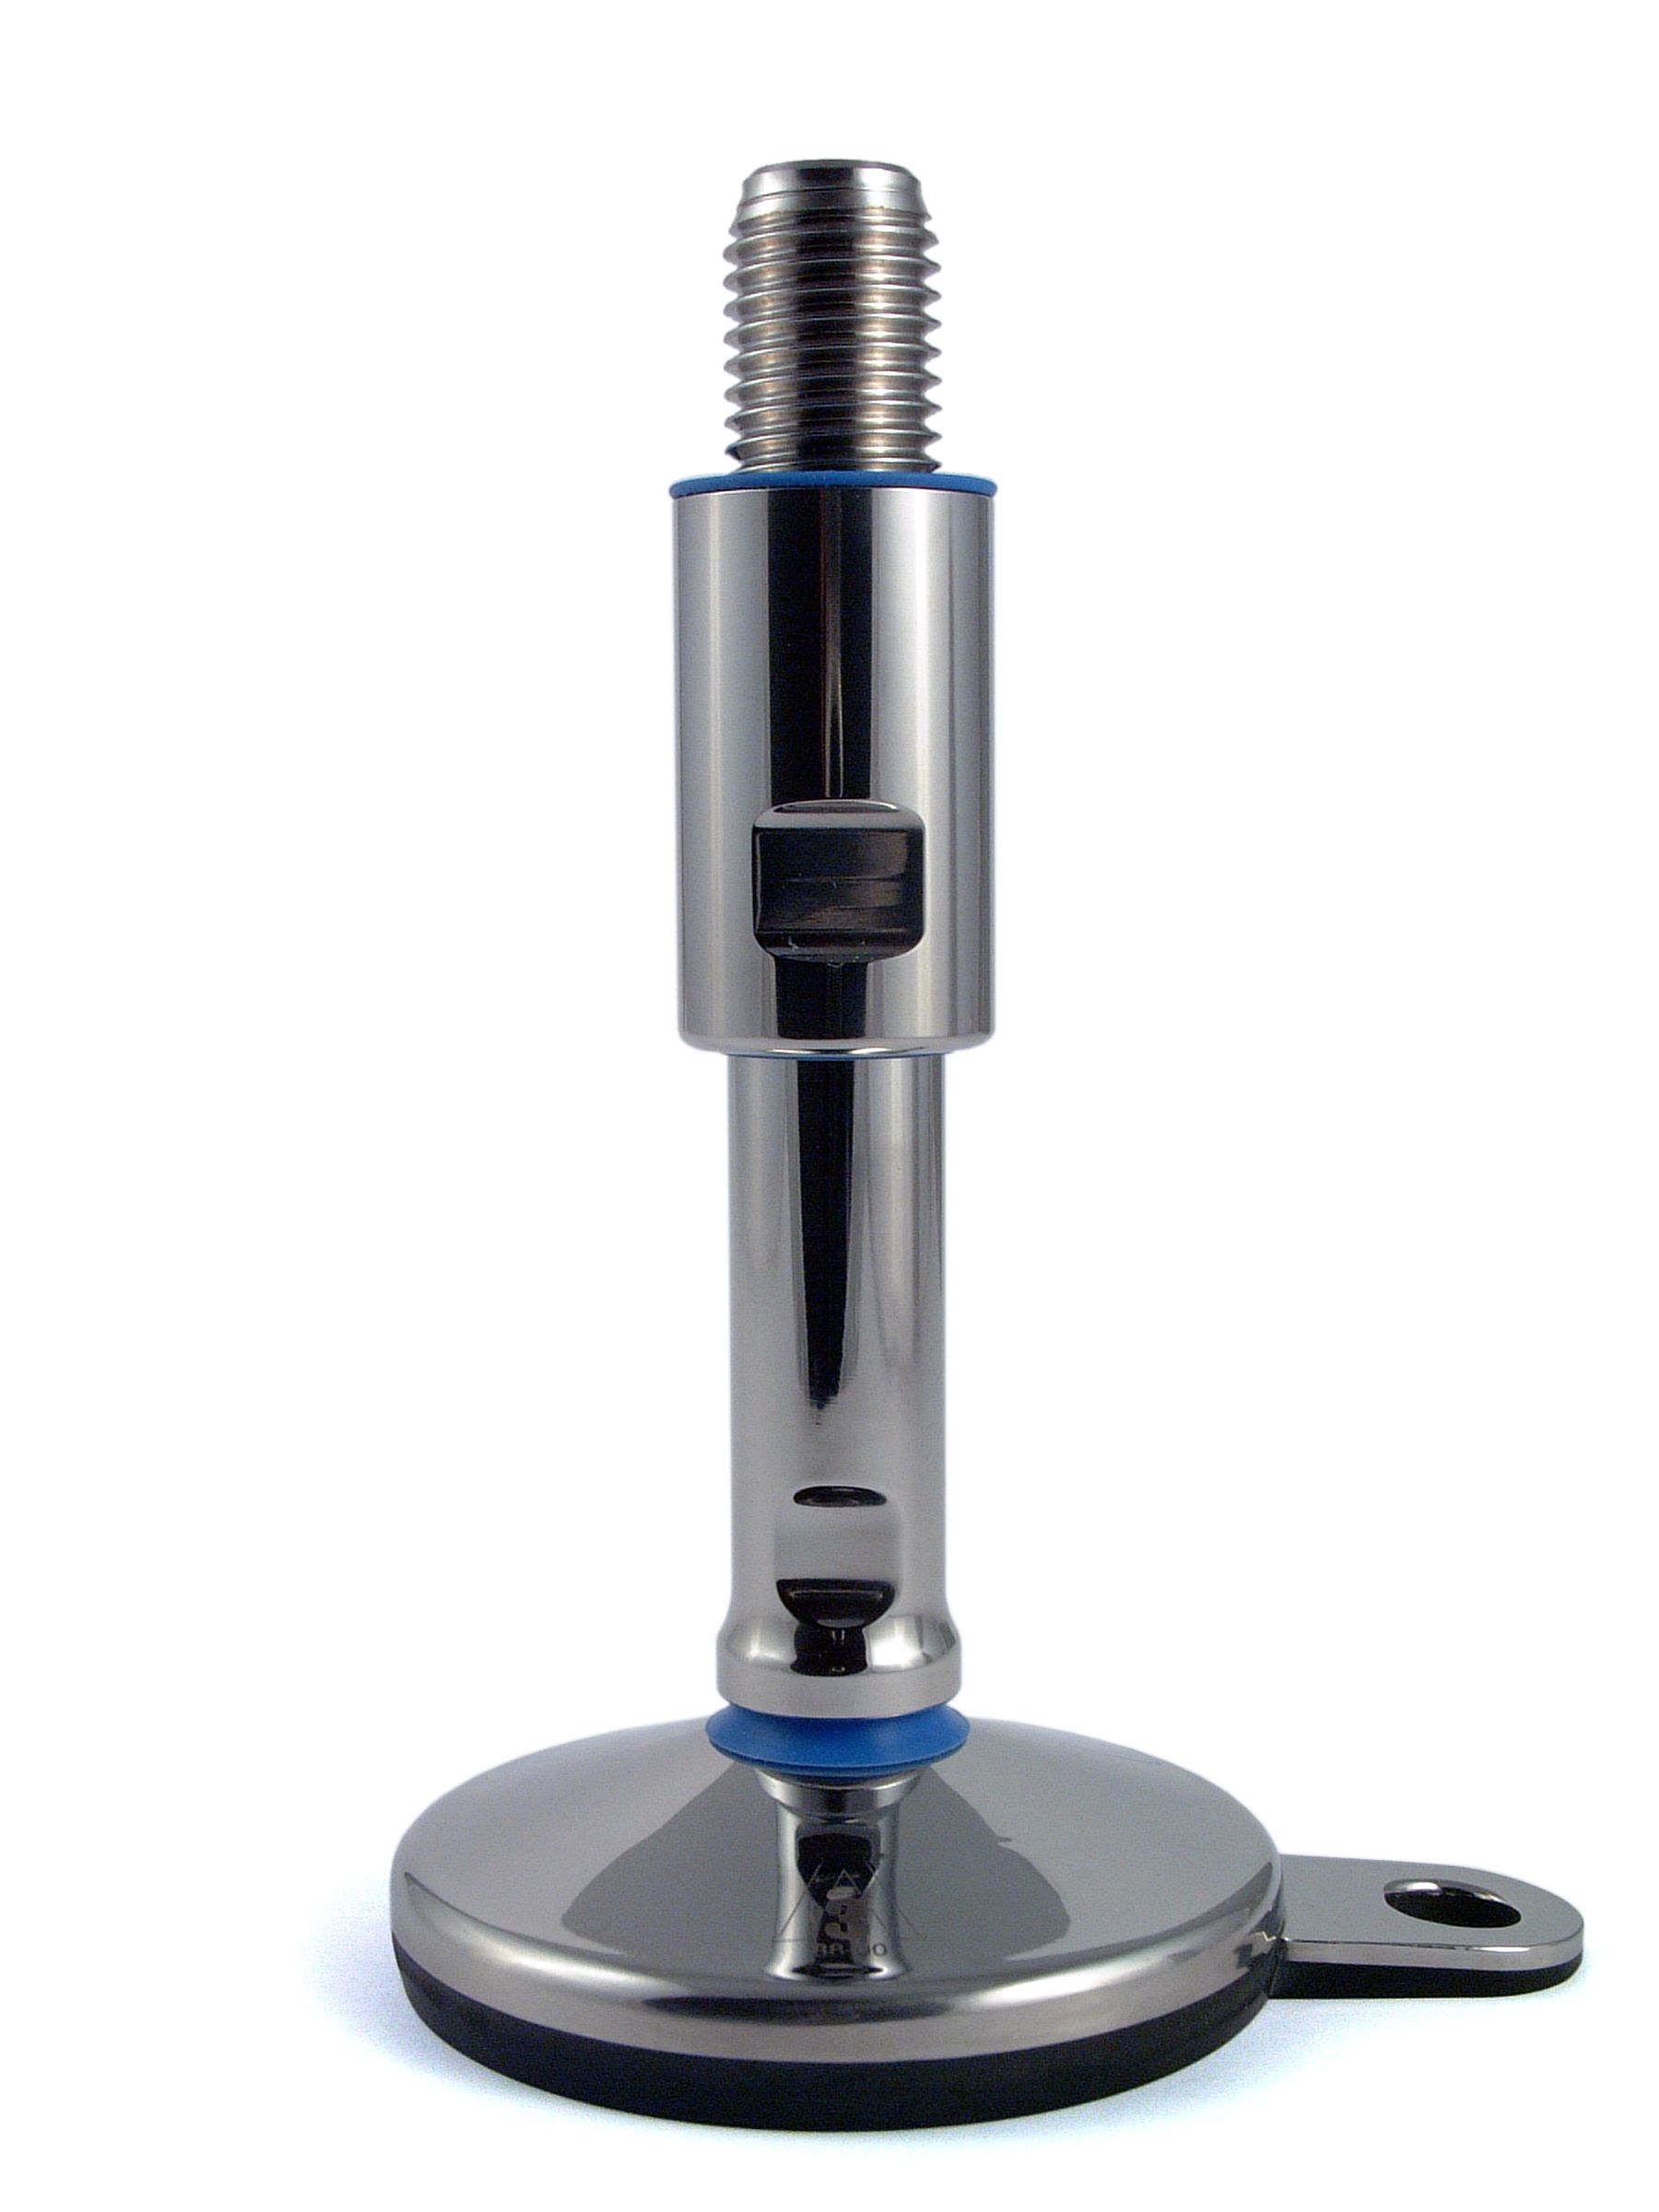 RS PRO M20 Stainless Steel Hygienic Adjustable Foot, 2500kg Static Load Capacity 15° Tilt Angle